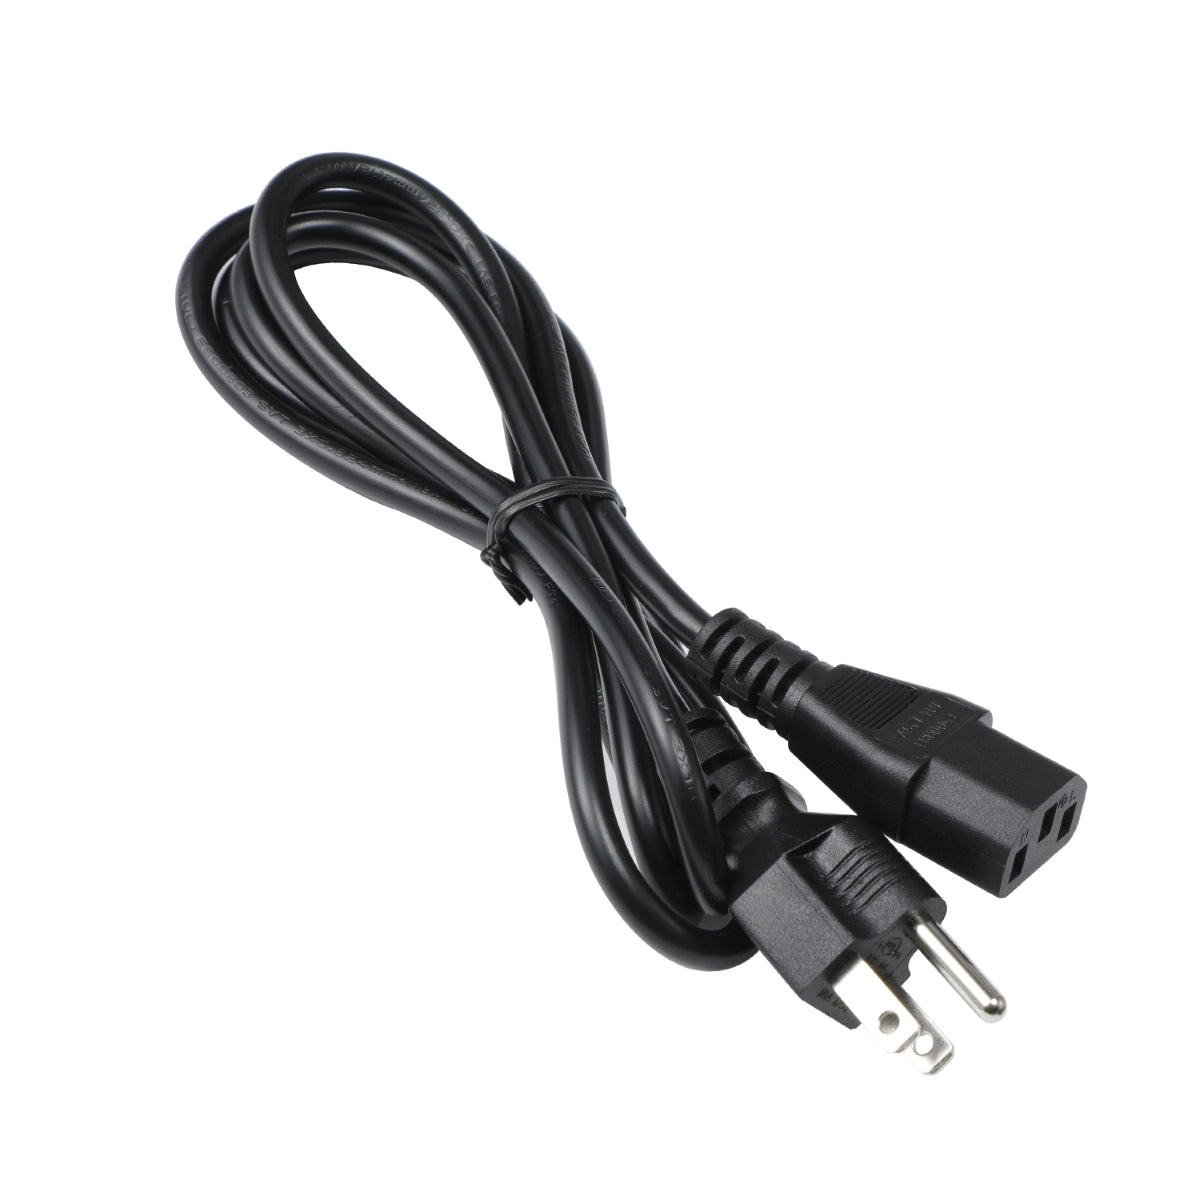 Power Cord for LG 27UD59P-B Monitor TV.